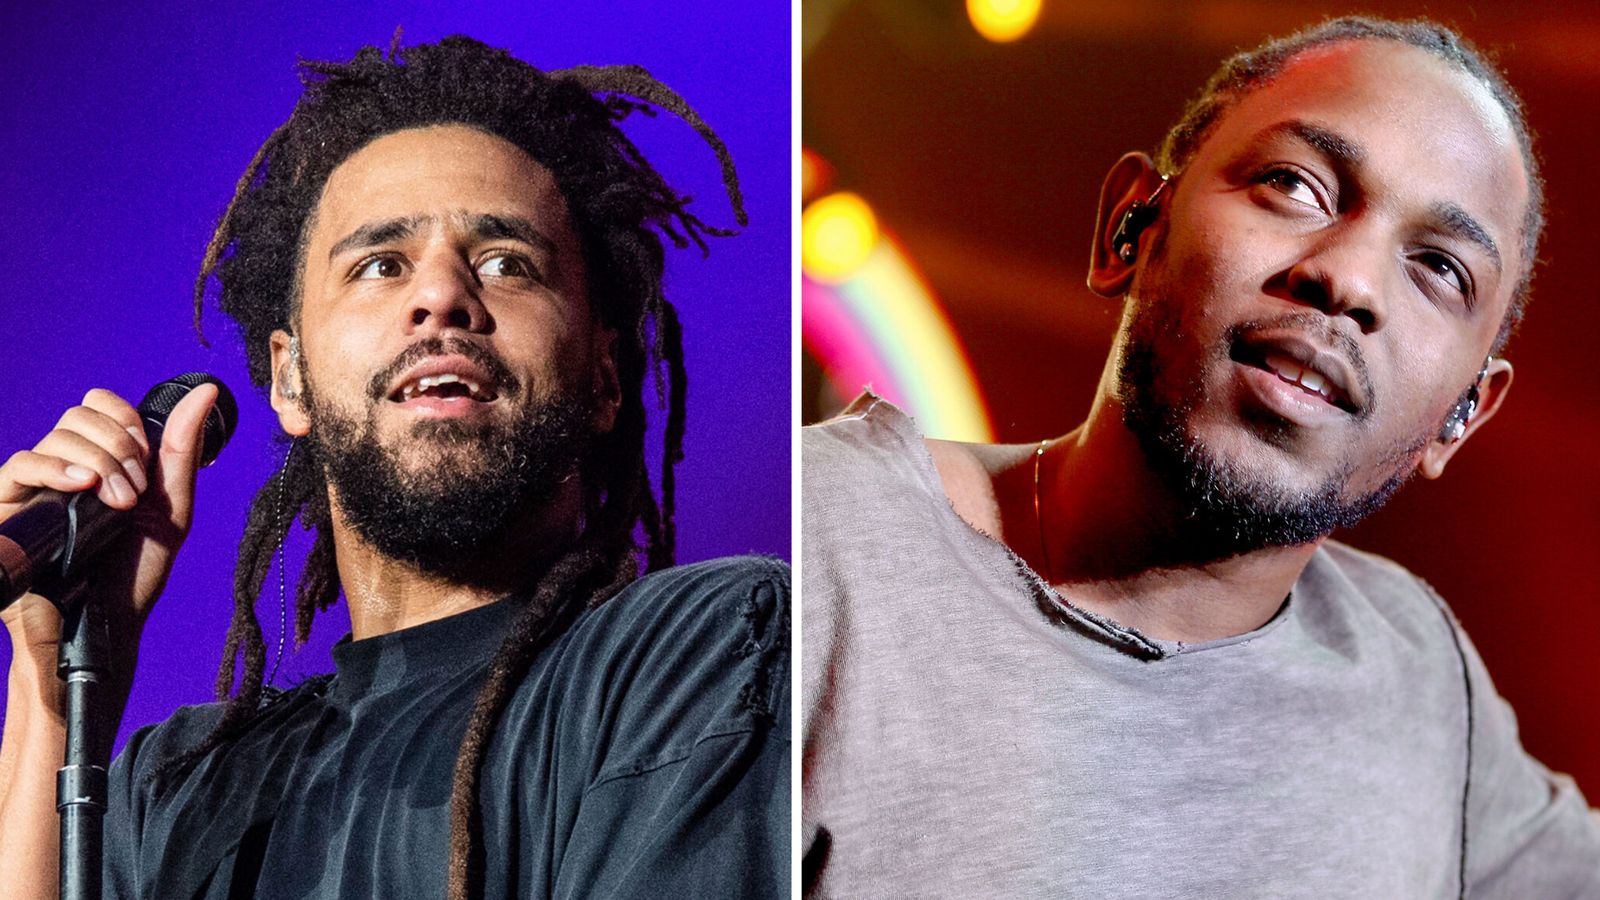 Rapper J Cole says he feels 'terrible' about Kendrick Lamar diss track and vows to delete it